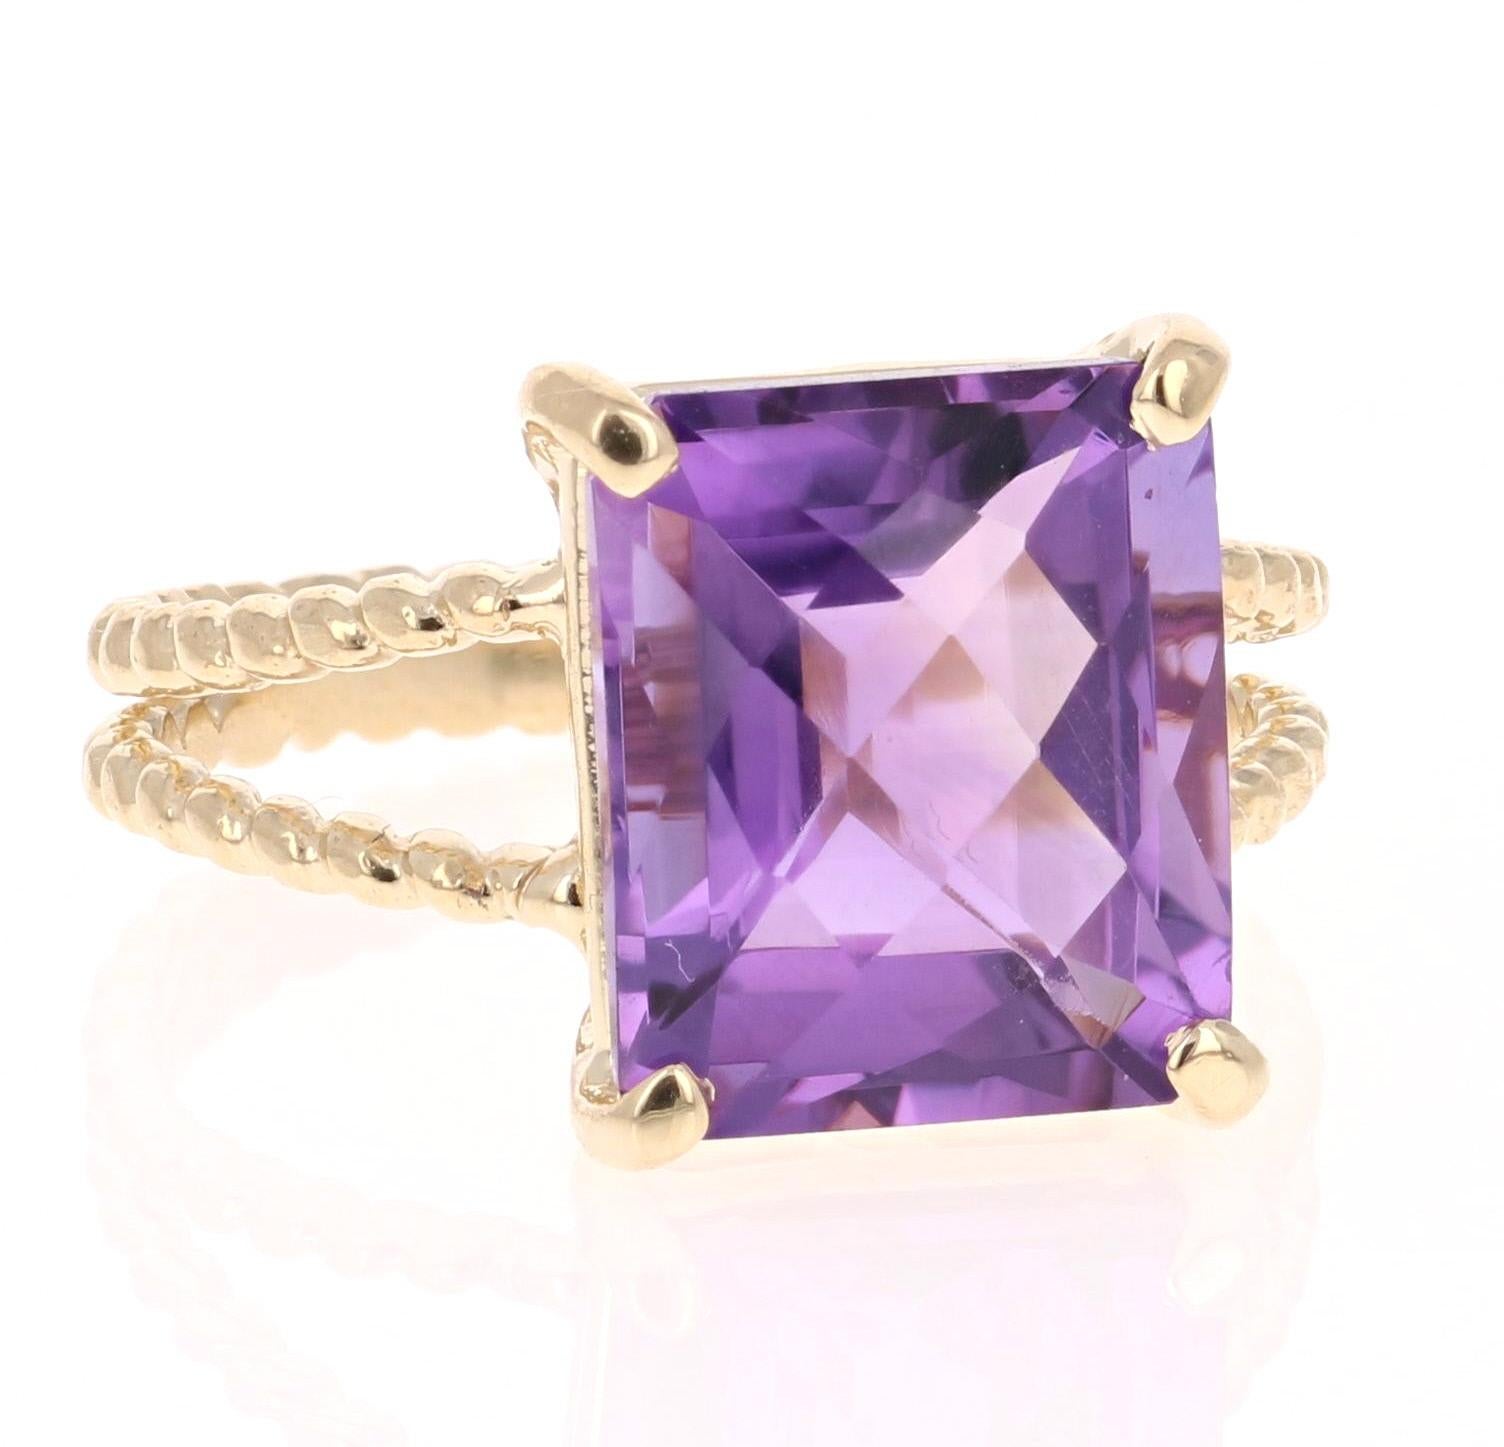 This beautiful and simple ring has a bright and vivid Emerald Cut Amethyst in the center that weighs 5.71 carats. 
The setting is beautifully crafted in 14K Yellow Gold and weighs approximately 3.3 grams.
The ring is a size 7 and can be re-sized if